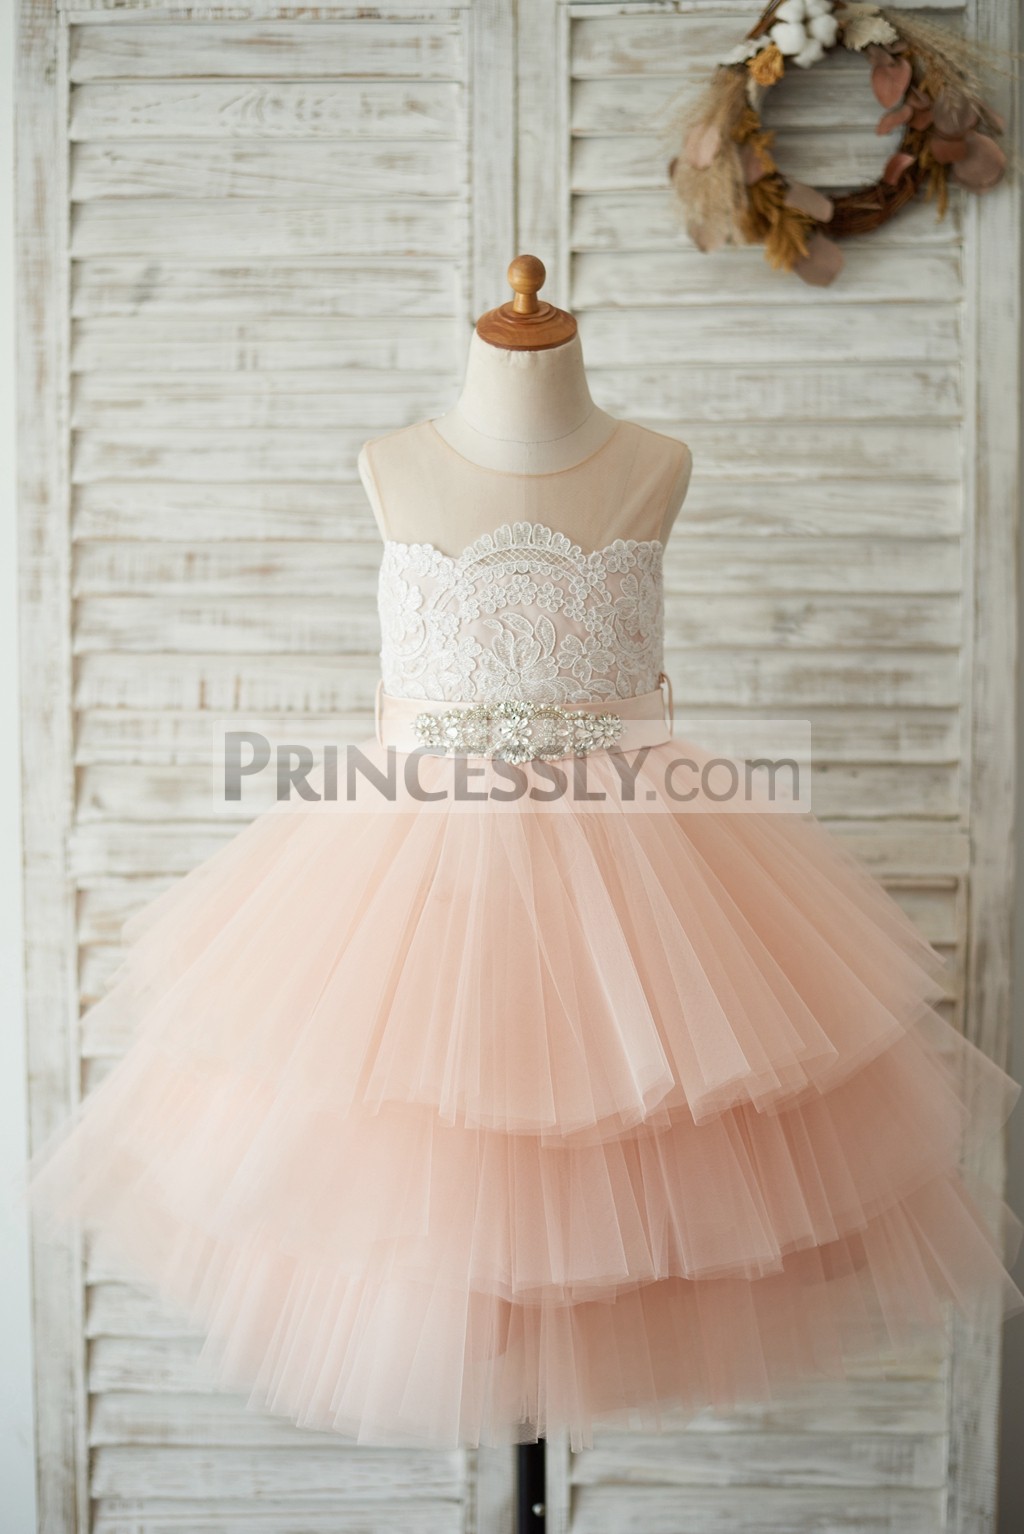 Princessly.com-K1003530-Sheer Neck Peach Pink Tulle Lace Cupcake Skirt Wedding Flower Girl Dress with beaded sash-31